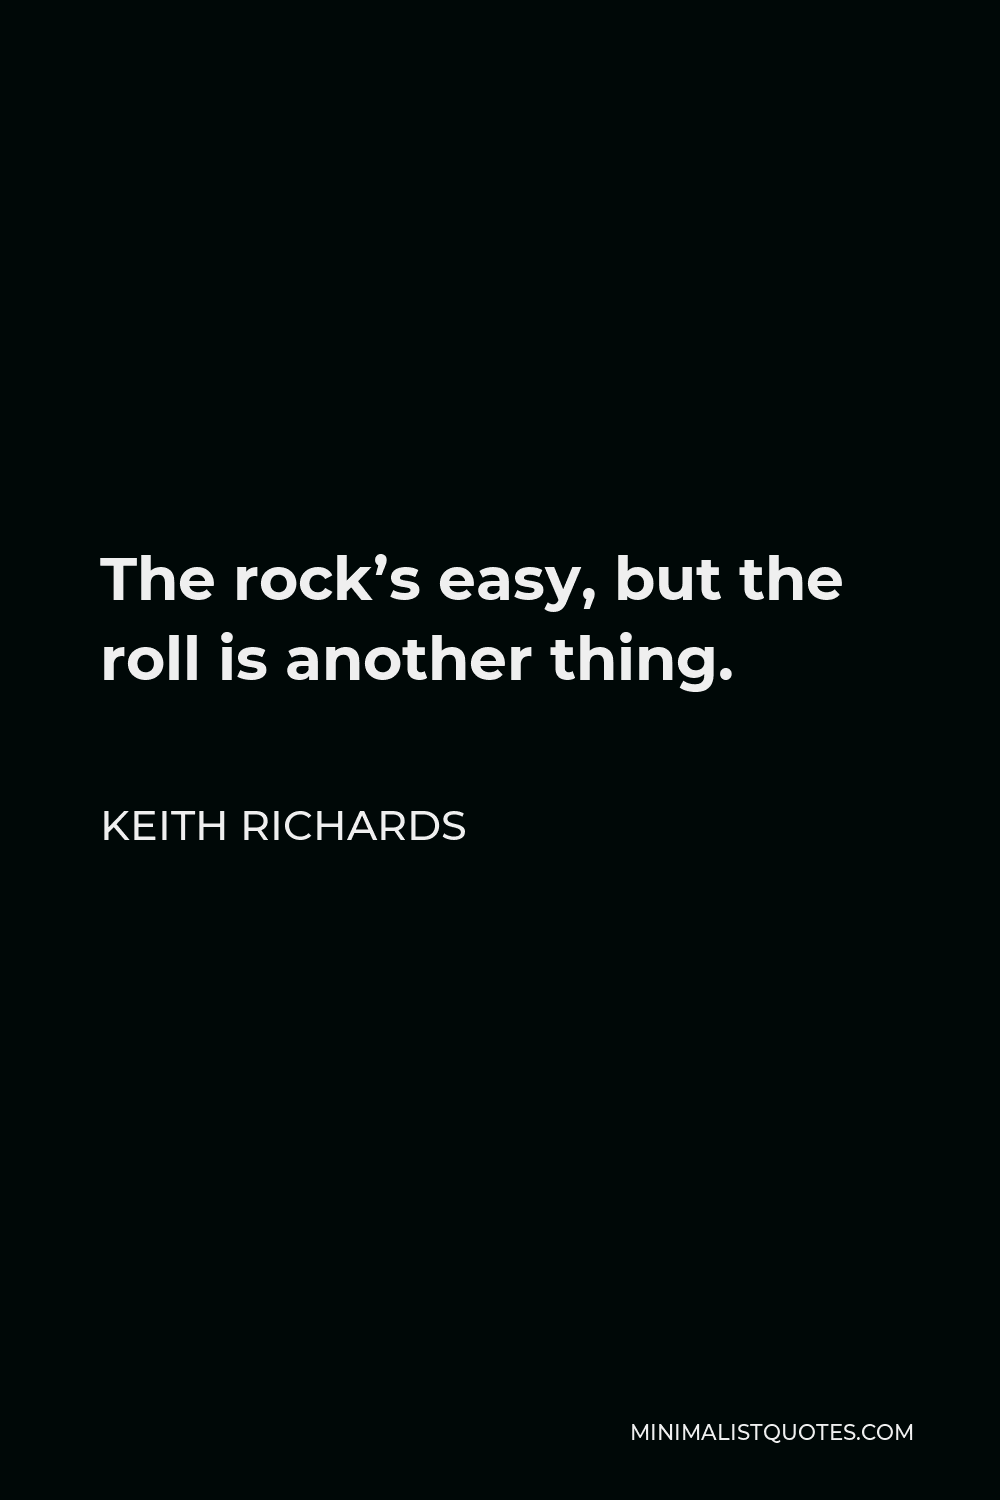 Keith Richards Quote - The rock’s easy, but the roll is another thing.